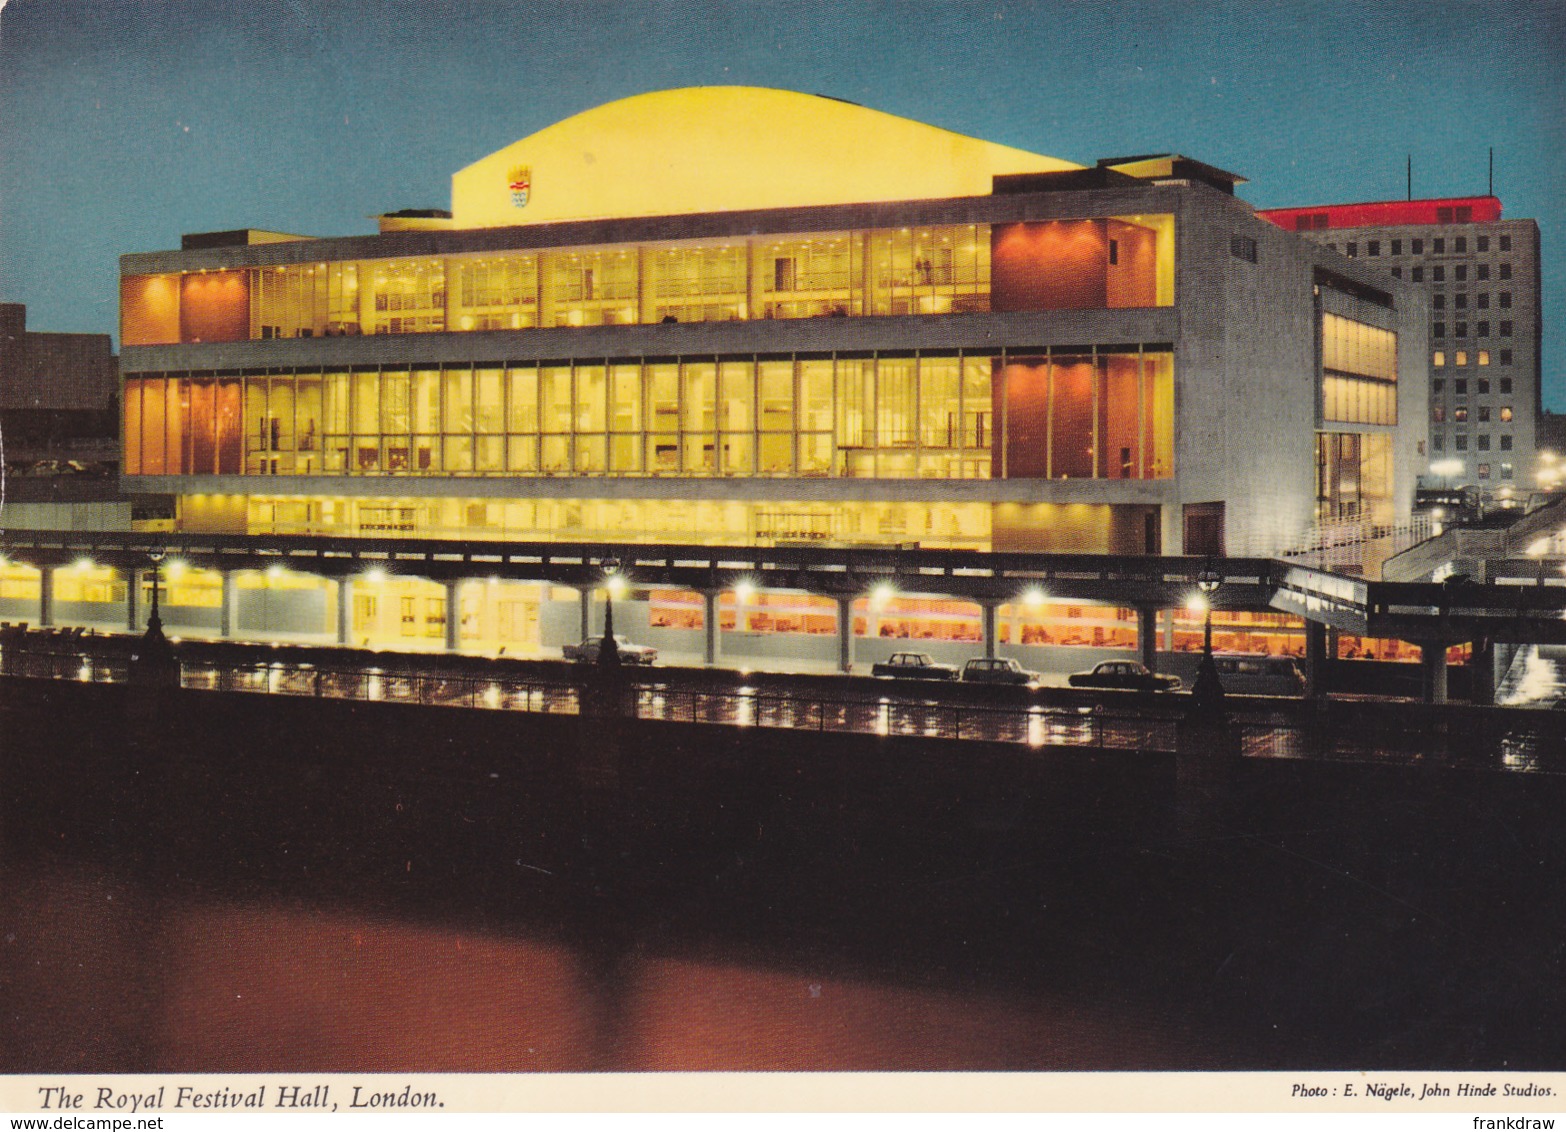 Postcard - The Royal Festival Hall, London - Card No. 2L70 - VG - Unclassified